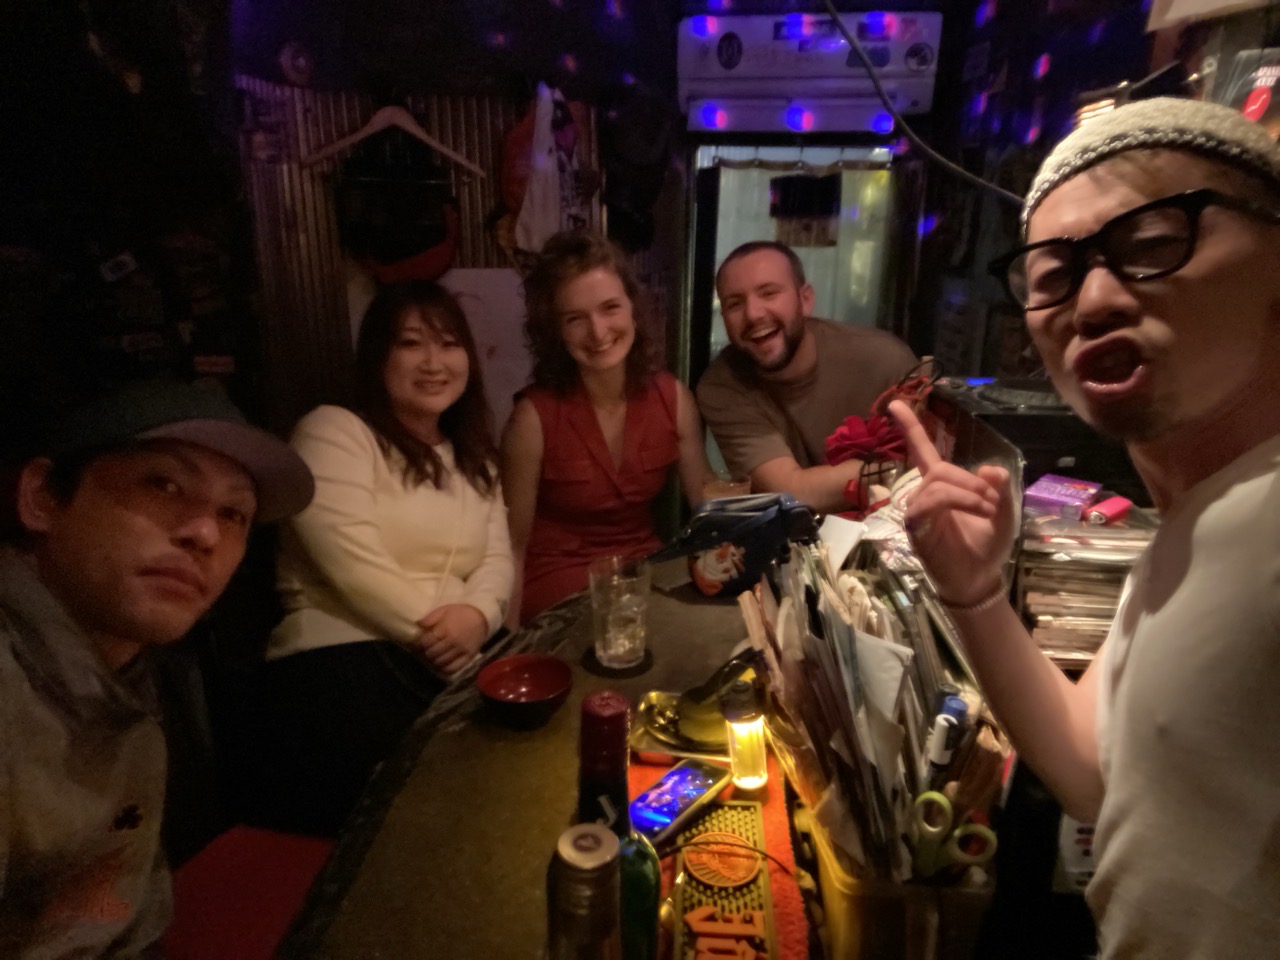 Us in the Golden Gai bar with the people we met there